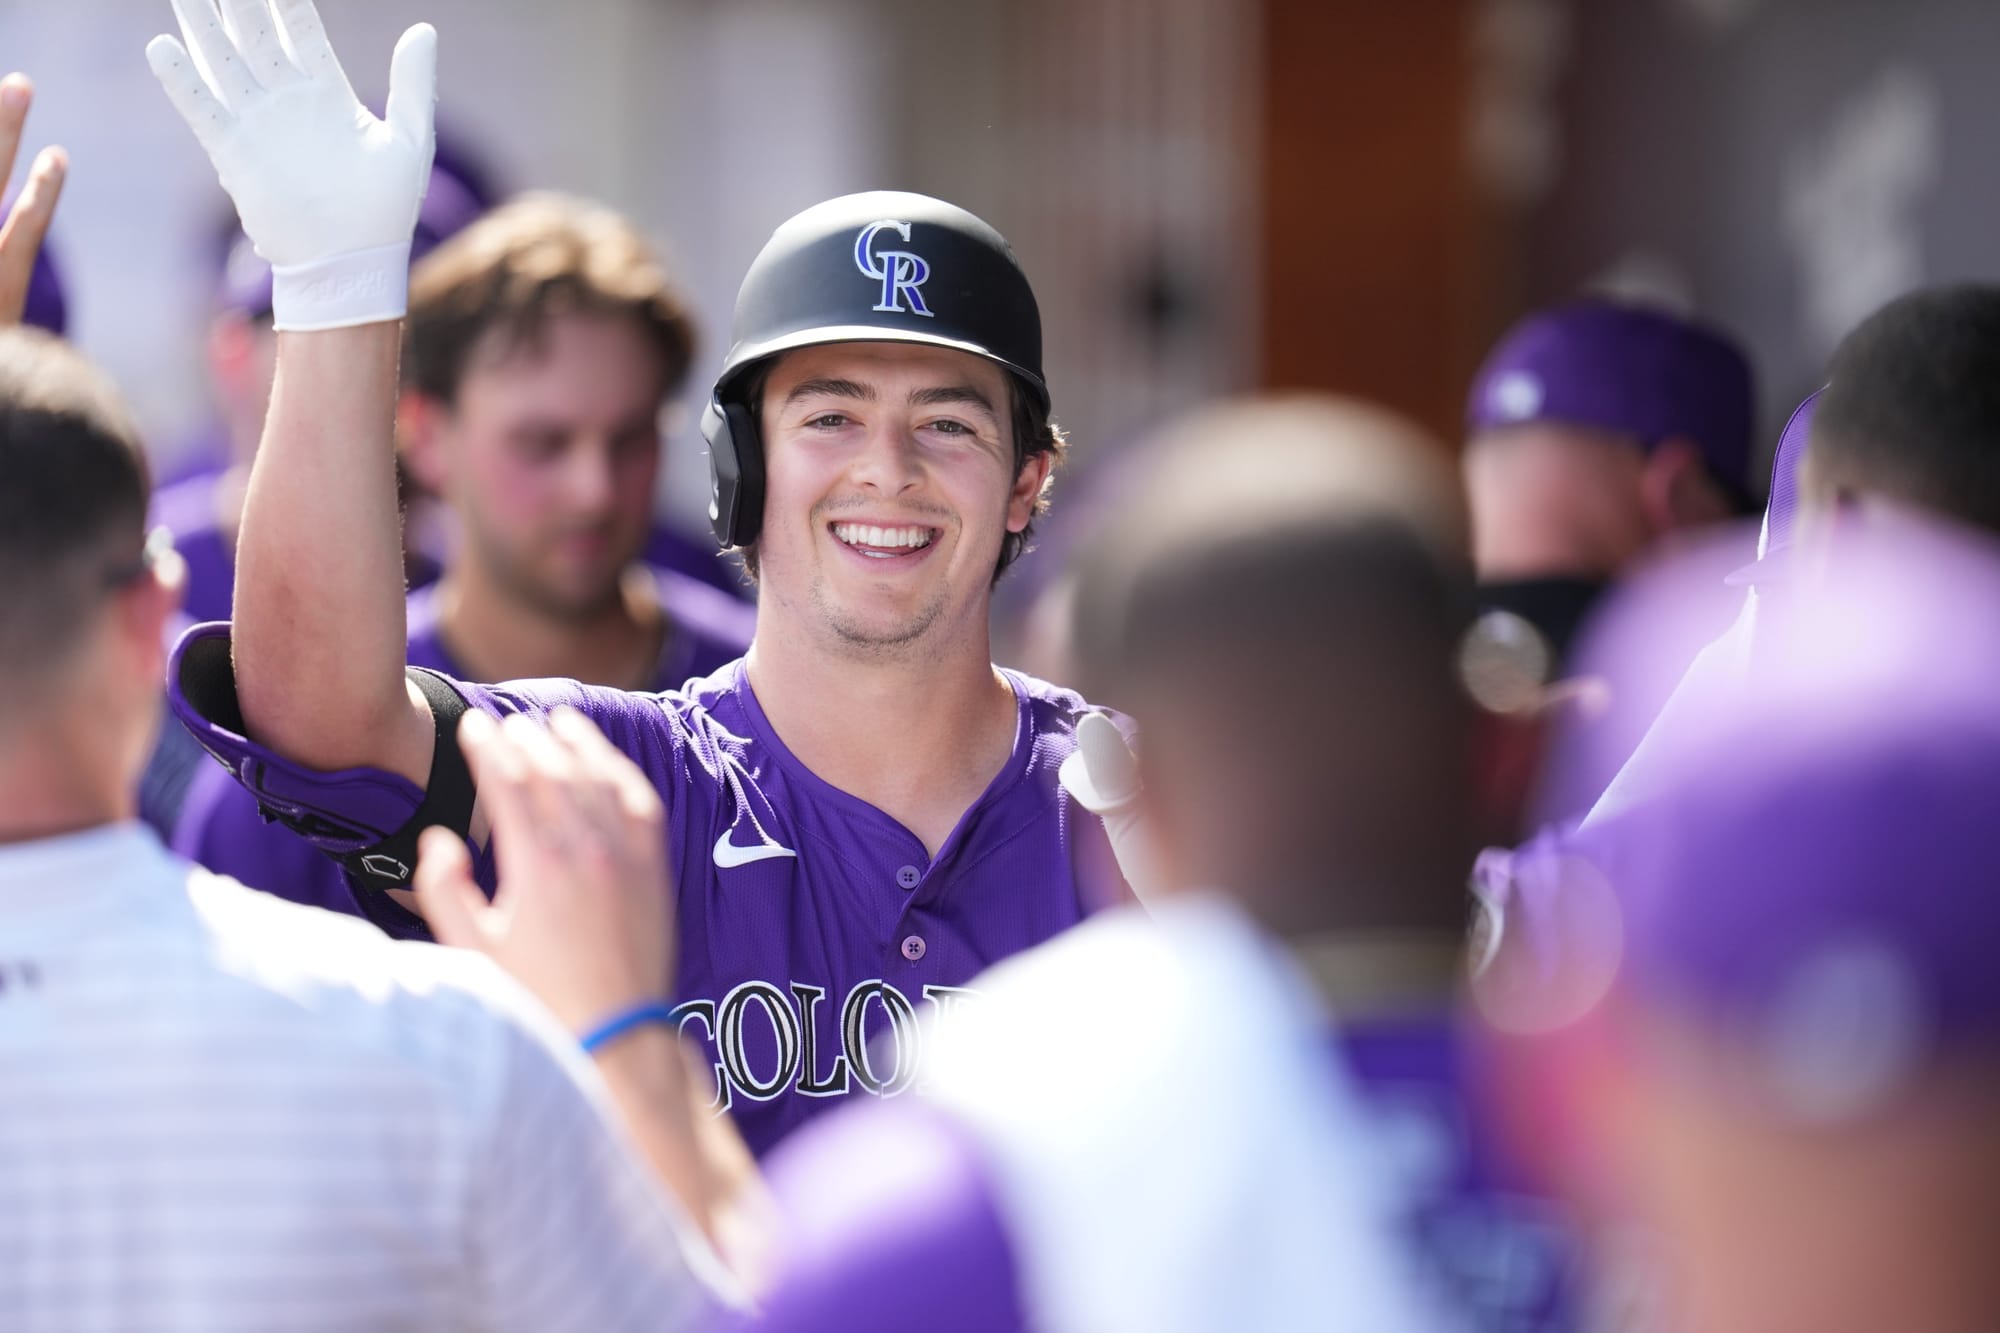 Michael Toglia celebrates in the dugout. He’s wearing a purple jersey, smiling, and high-fiving his teammates.